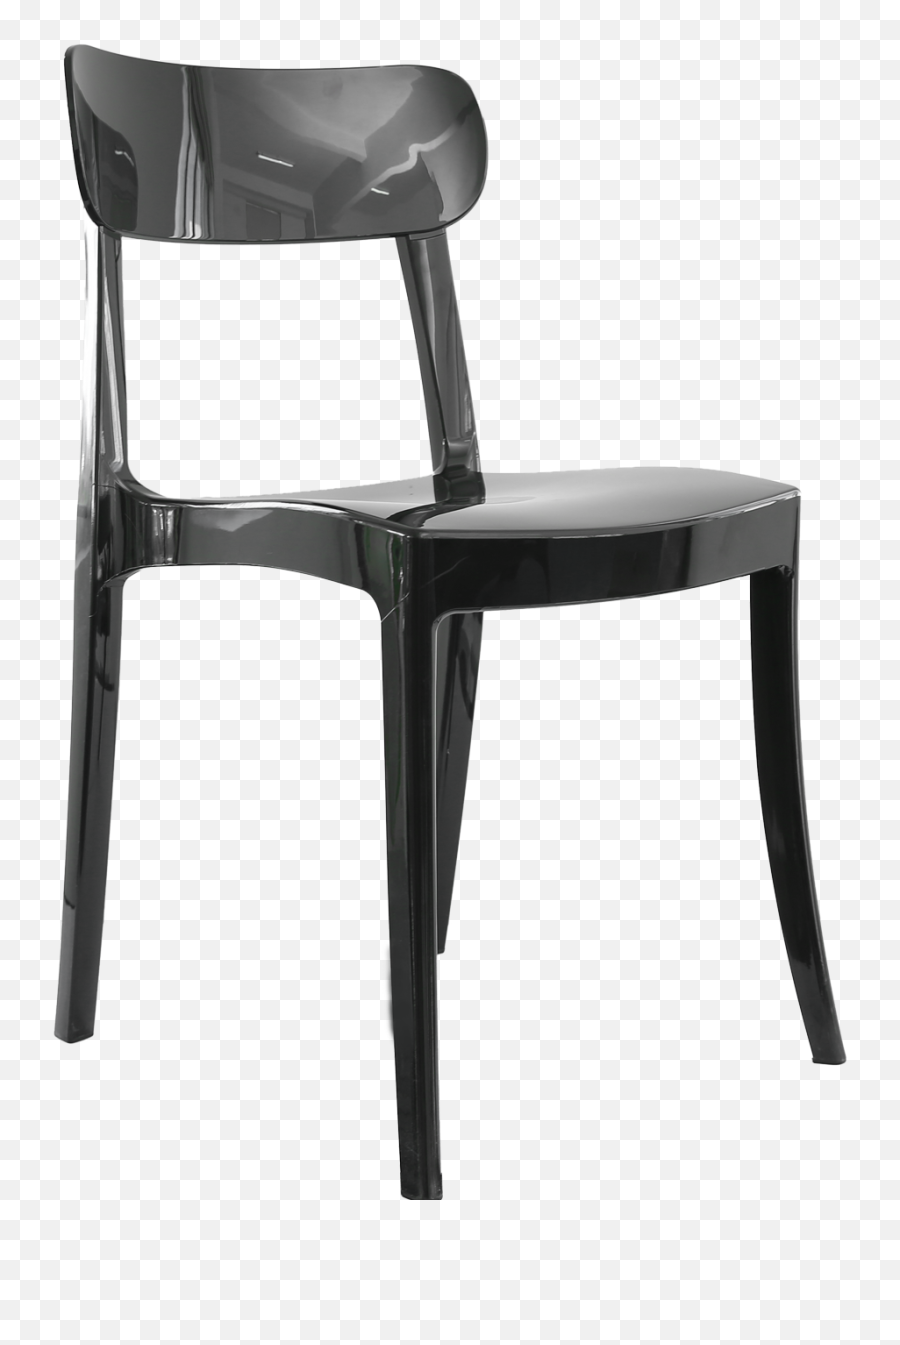 Download Metal Furniture Png Transparent - Chair,Chairs Png